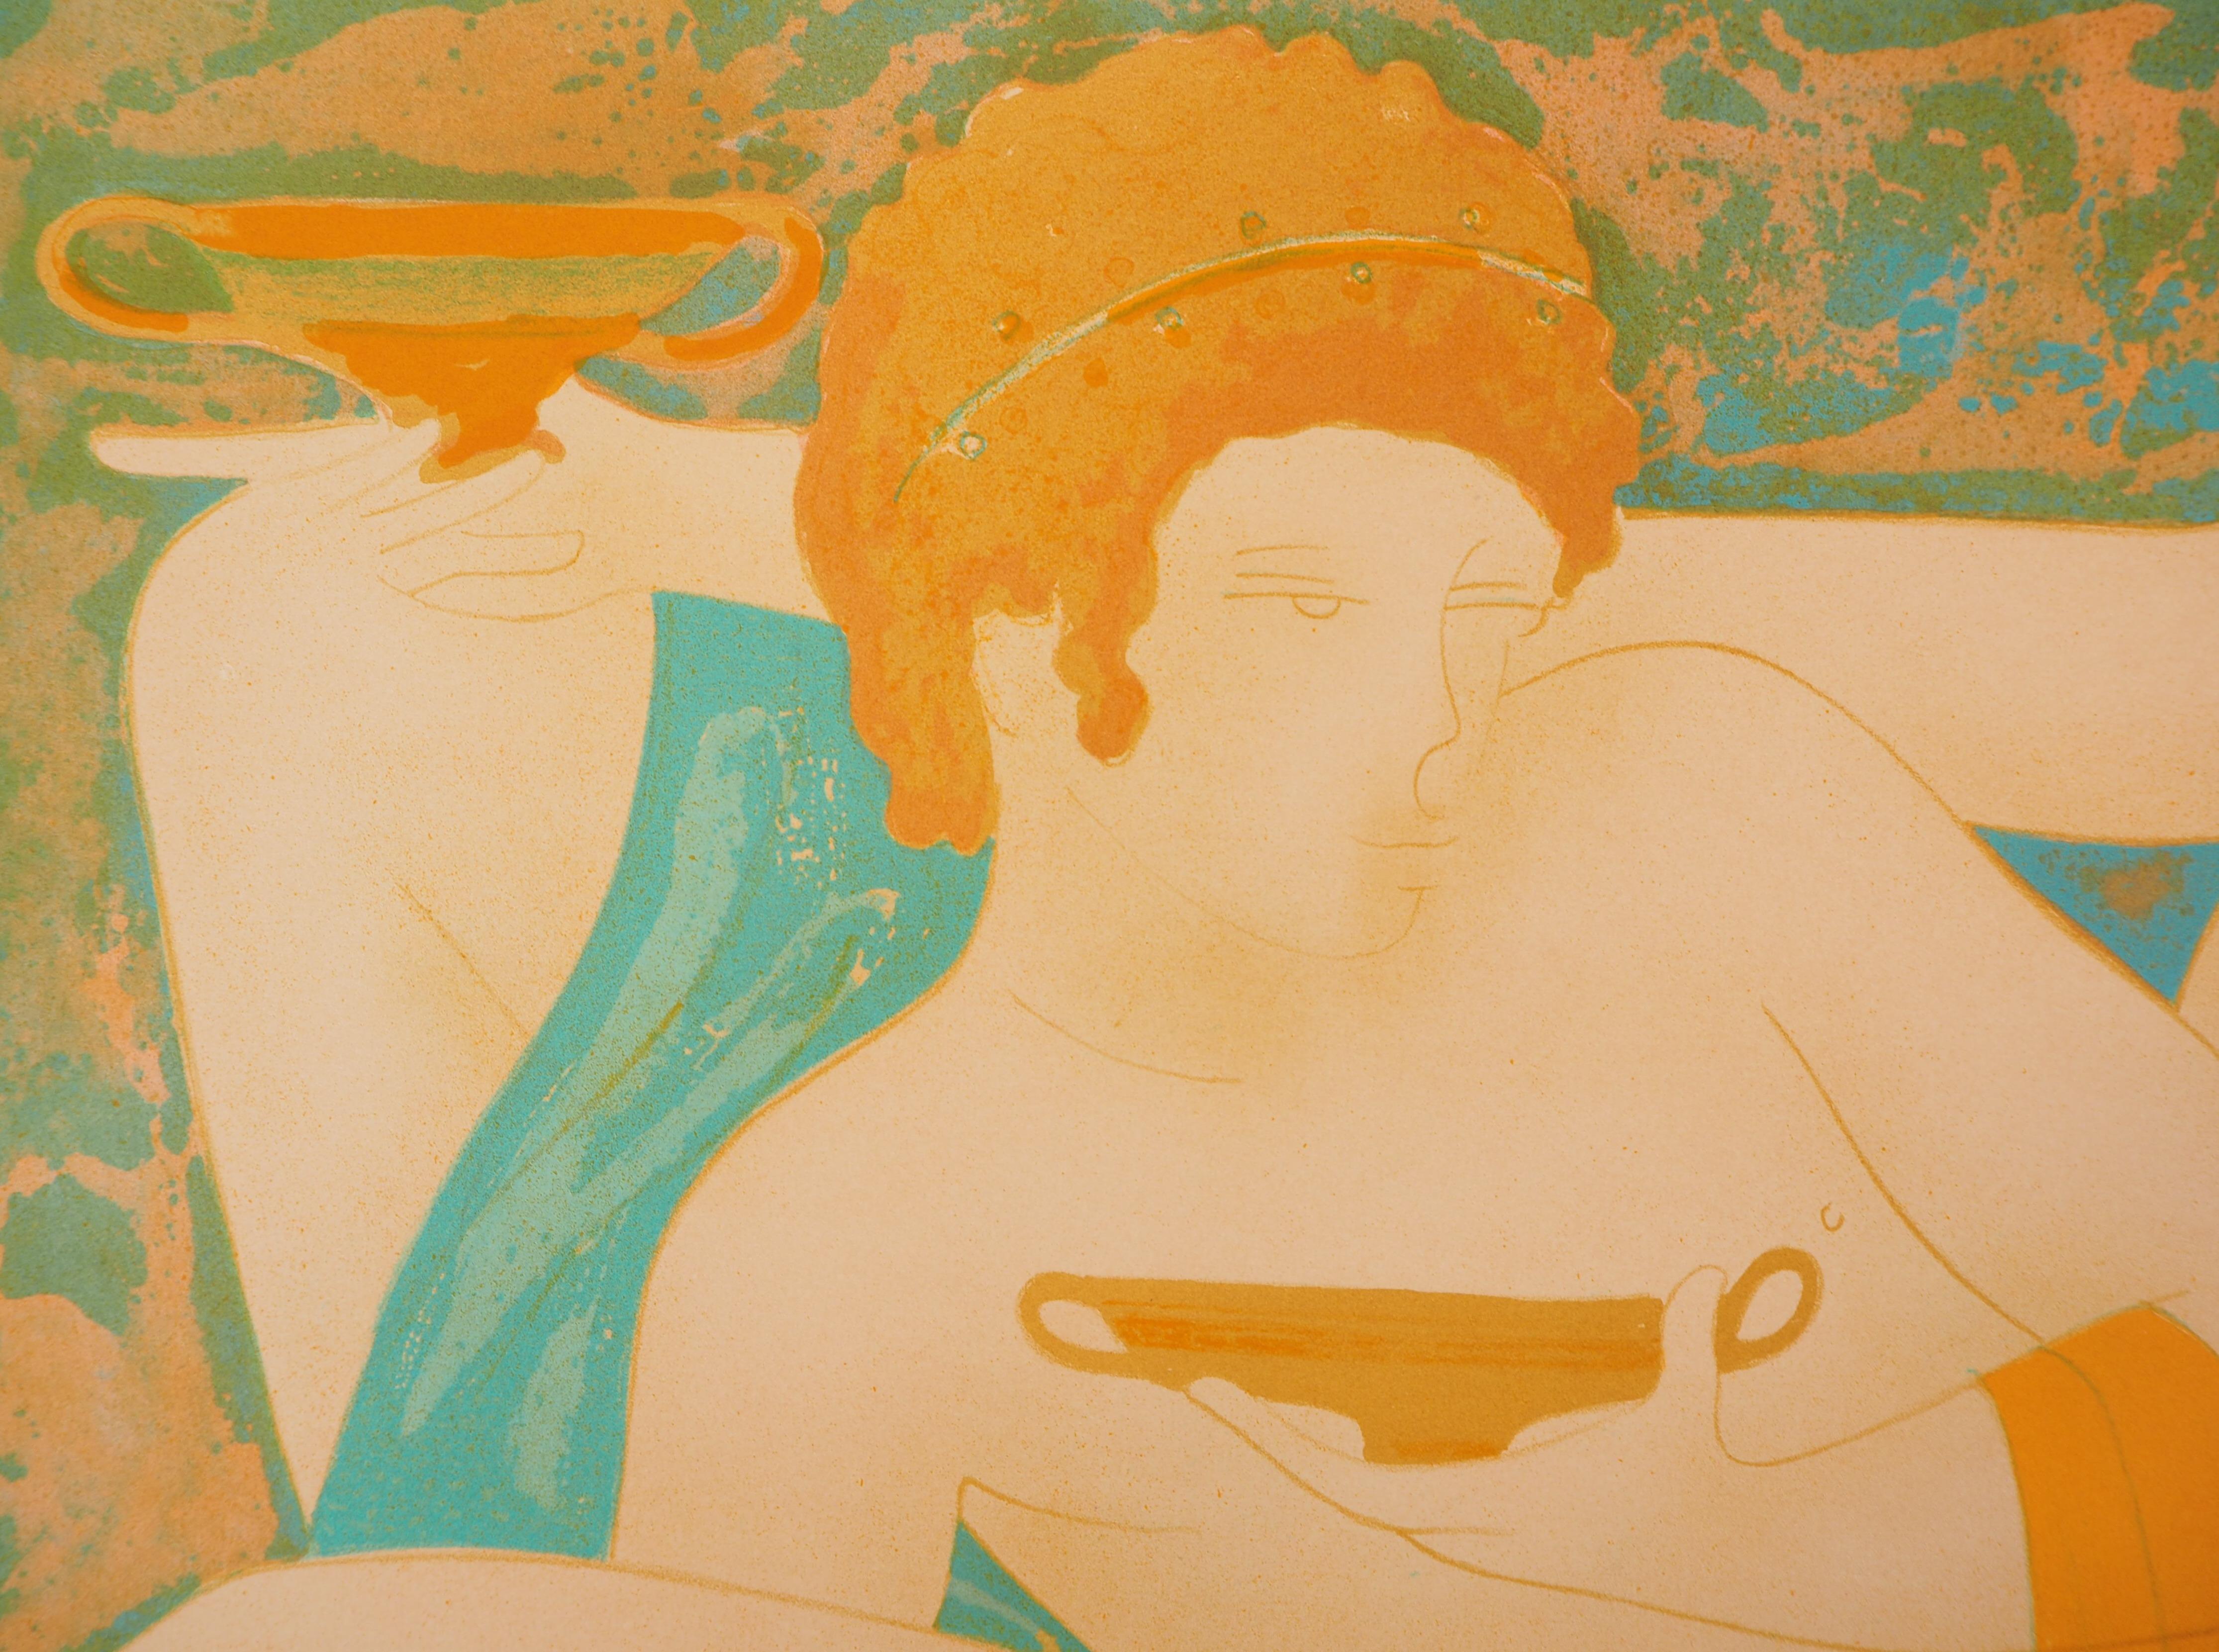 The Feast - Original lithograph, Handsigned and Numbered /100 - Orange Figurative Print by Alain Bonnefoit